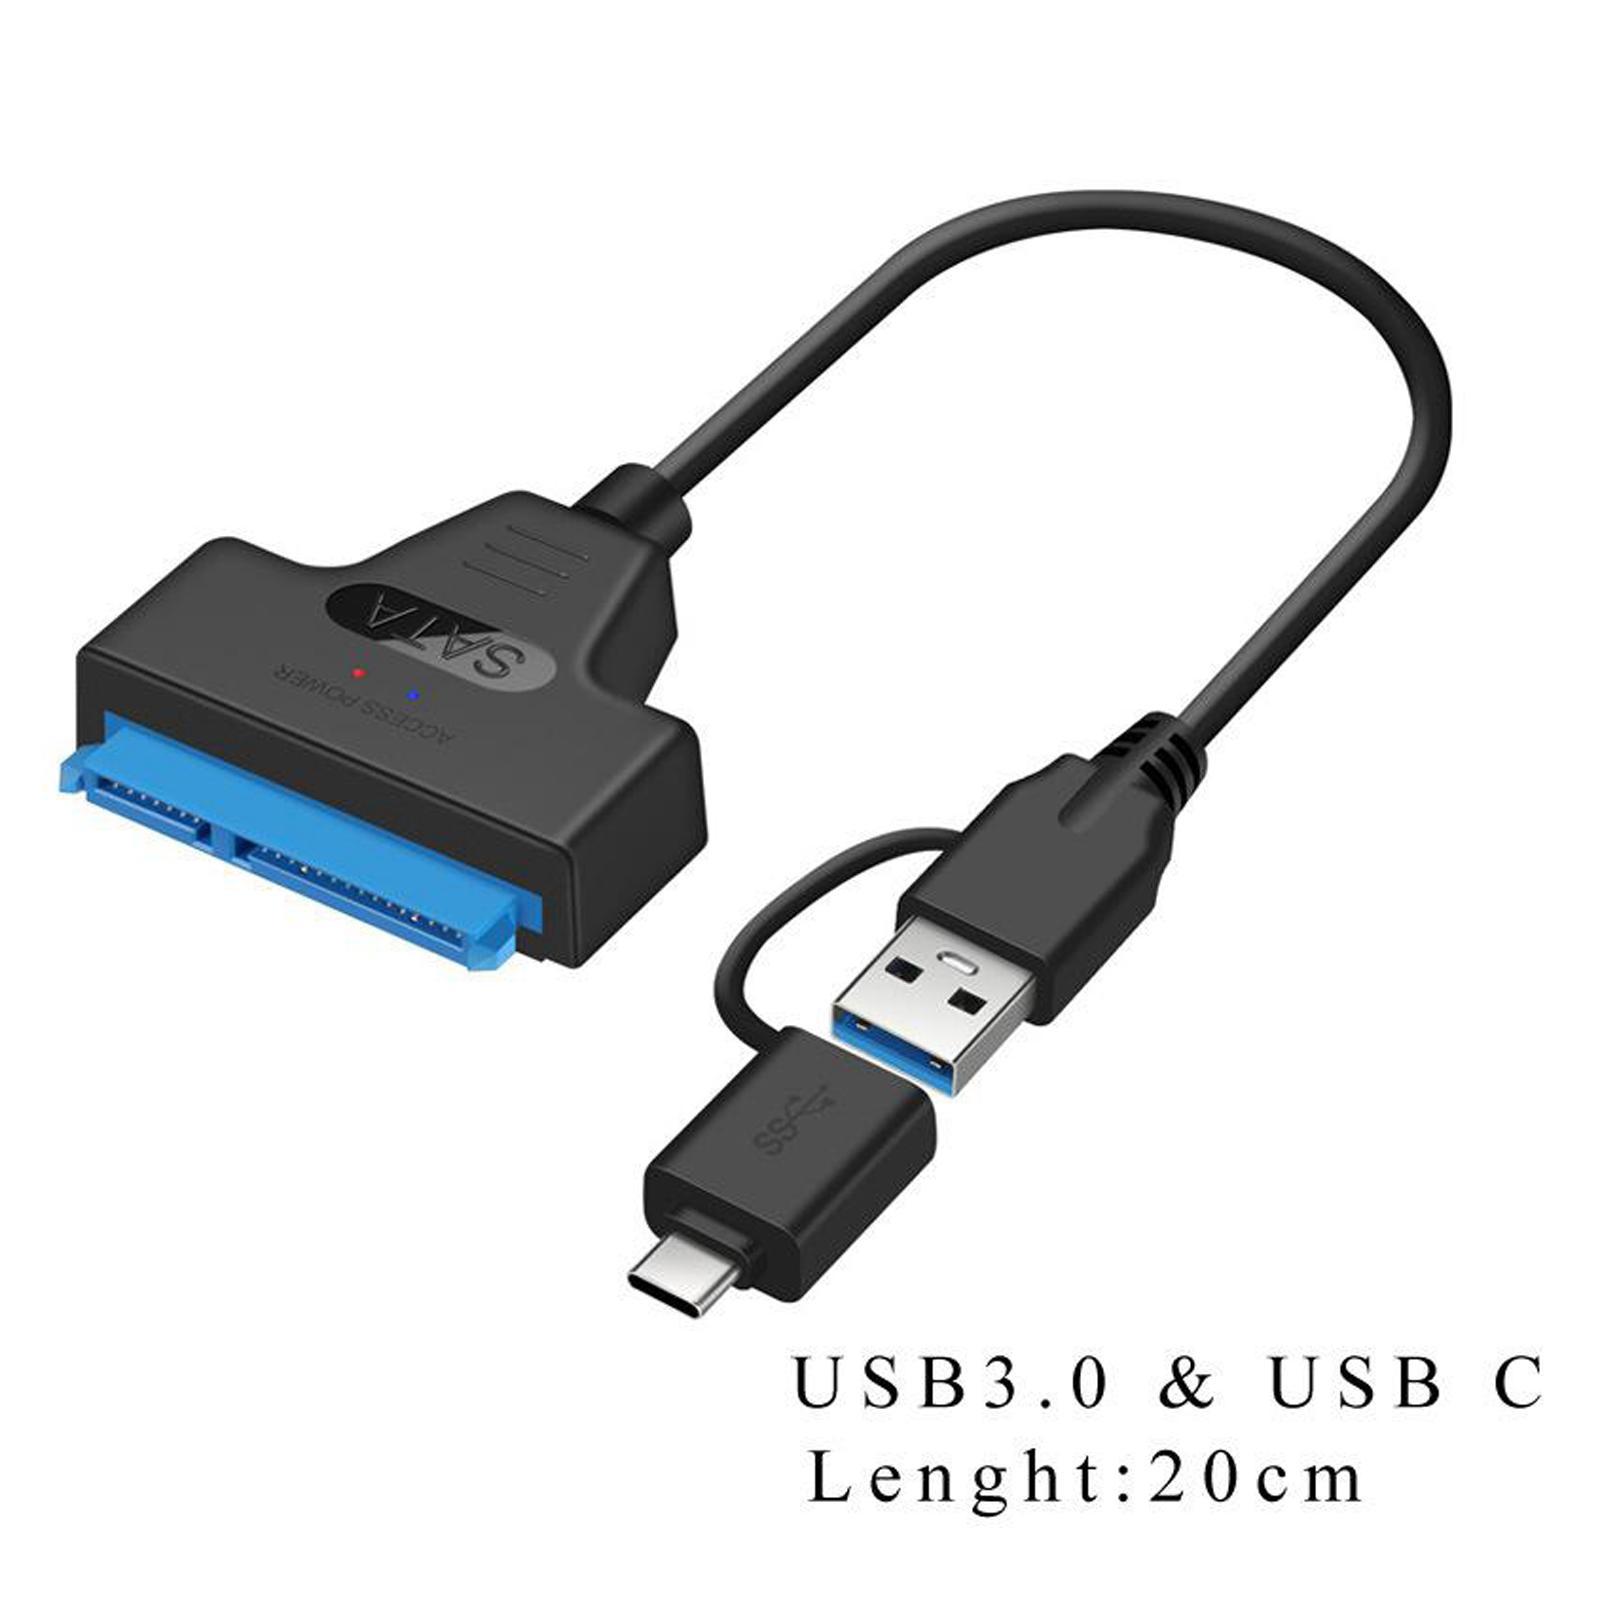 USB 3.0 to 2.5" SATA 22-Pin Hard Drive Adapter Cable Support UASP 20cm